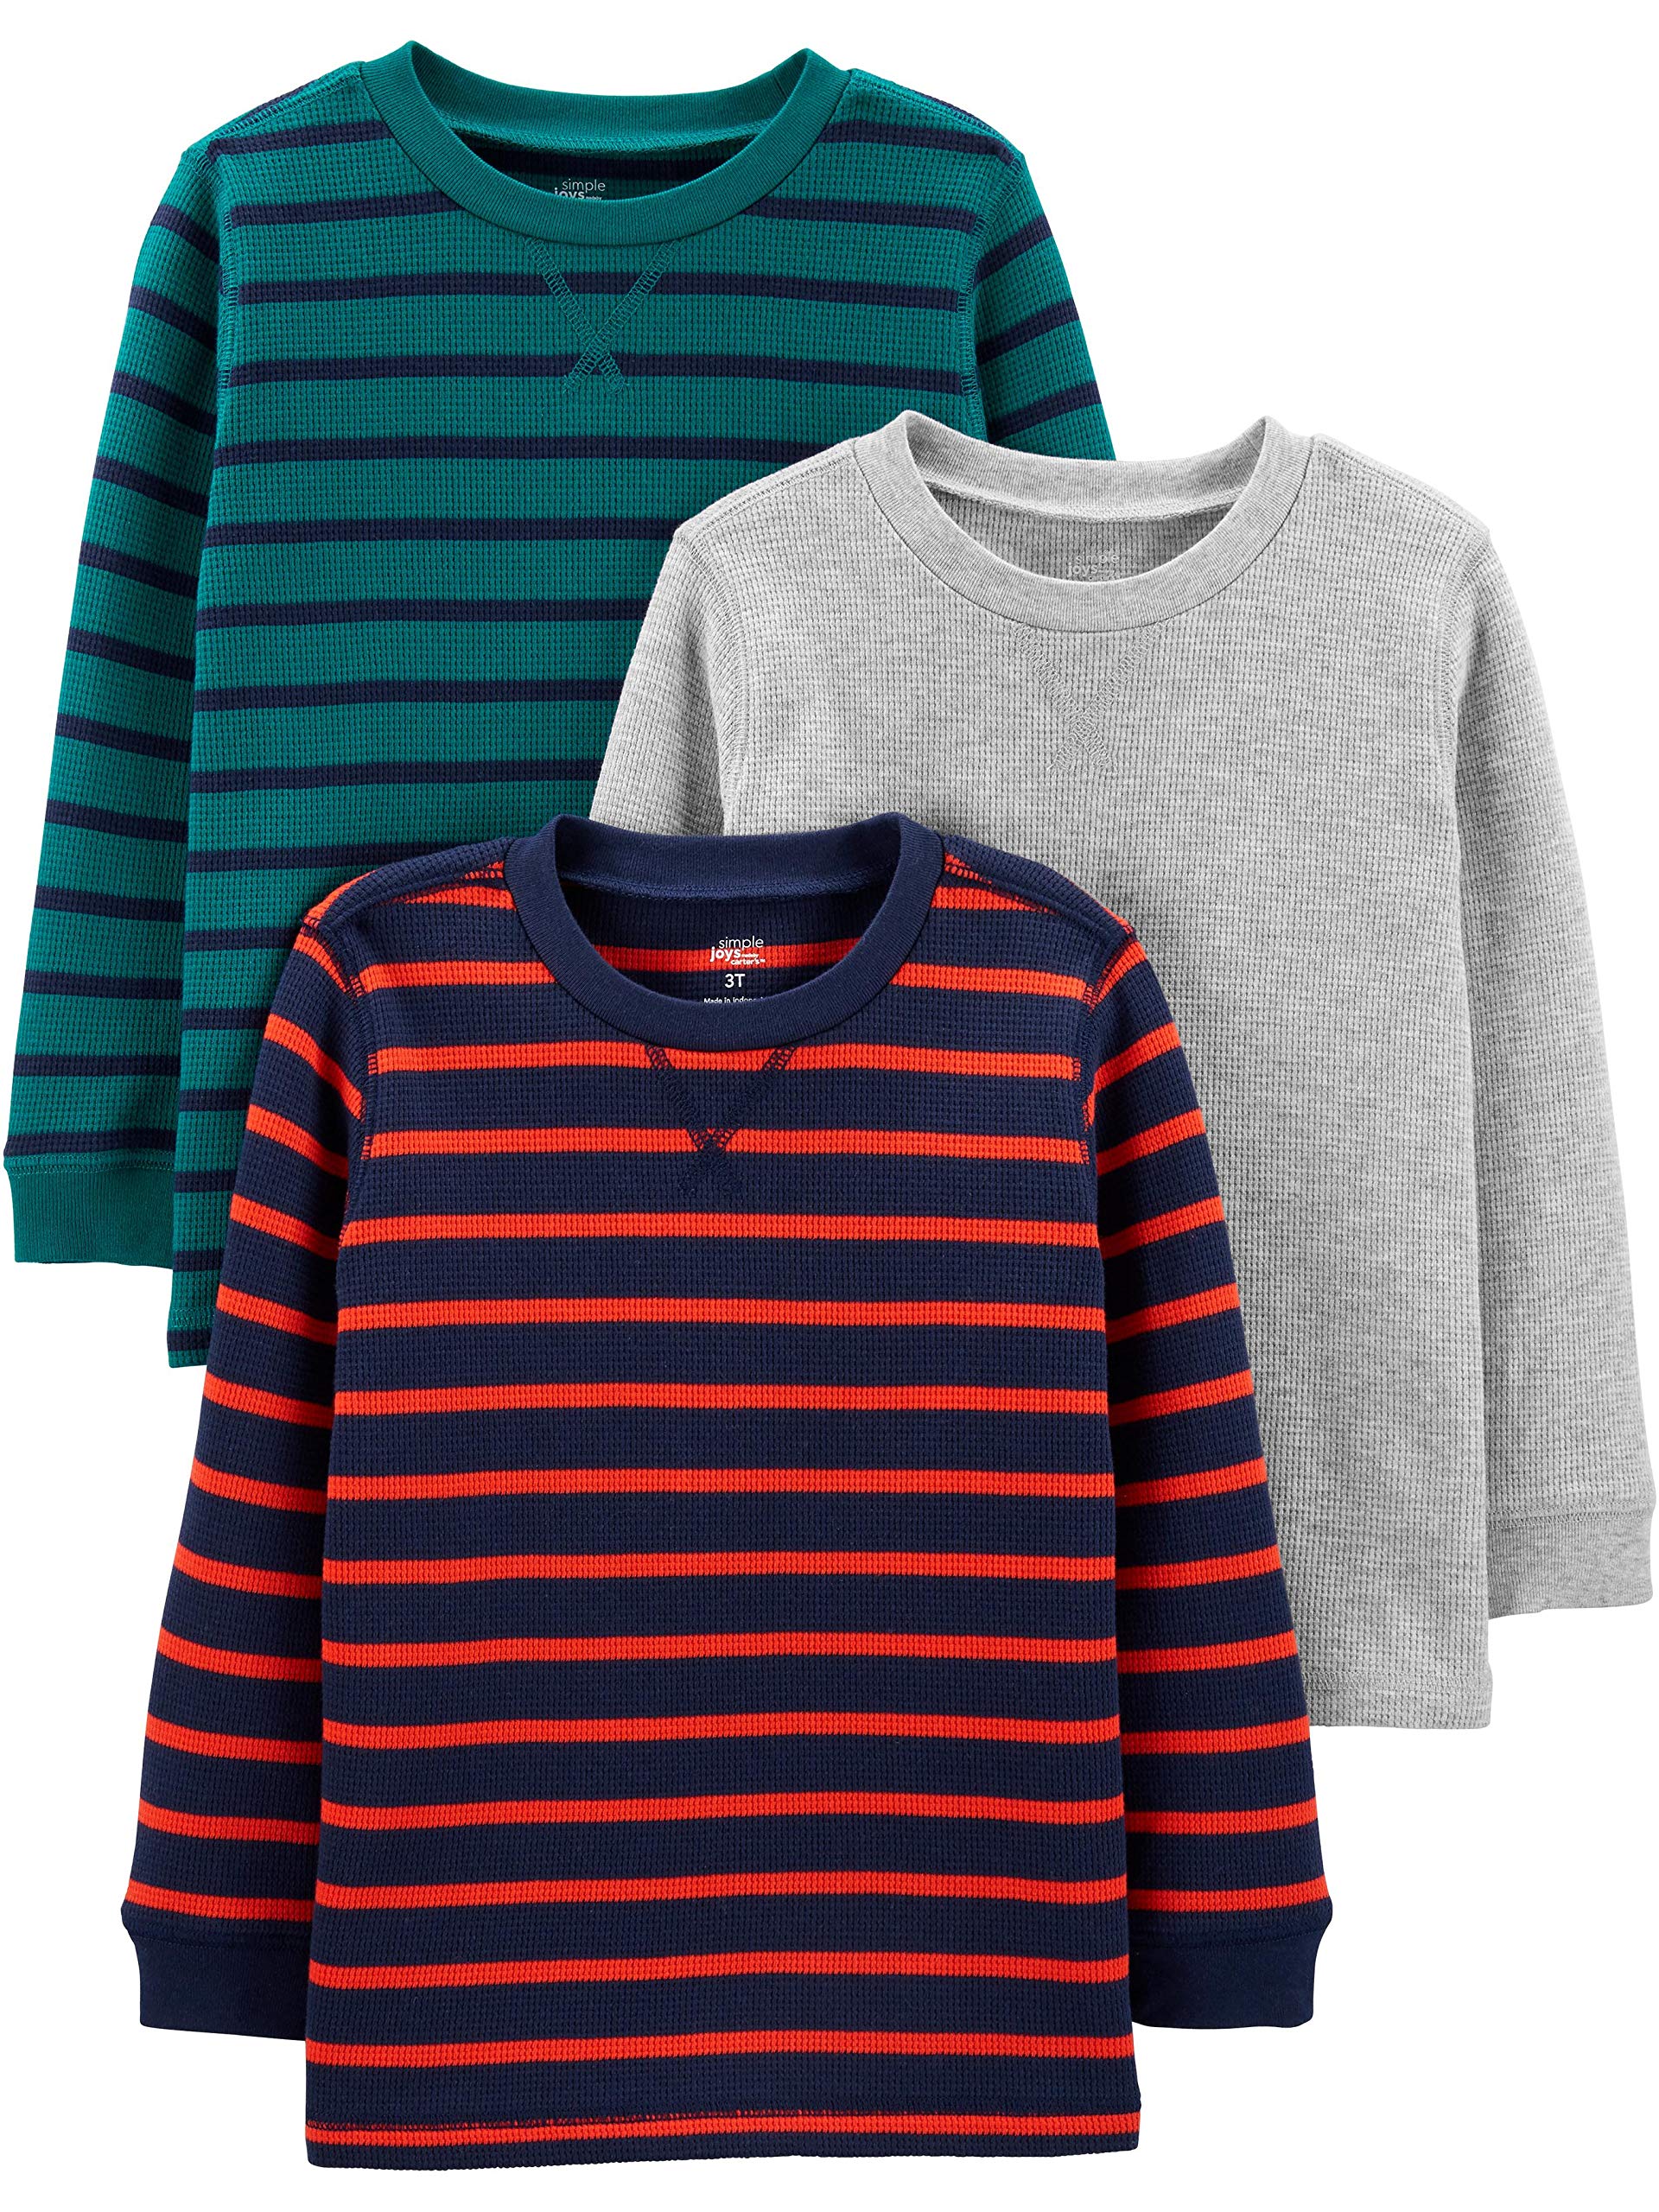 Simple Joys by Carter's Boys' Thermal Long-Sleeve Shirts, Pack of 3